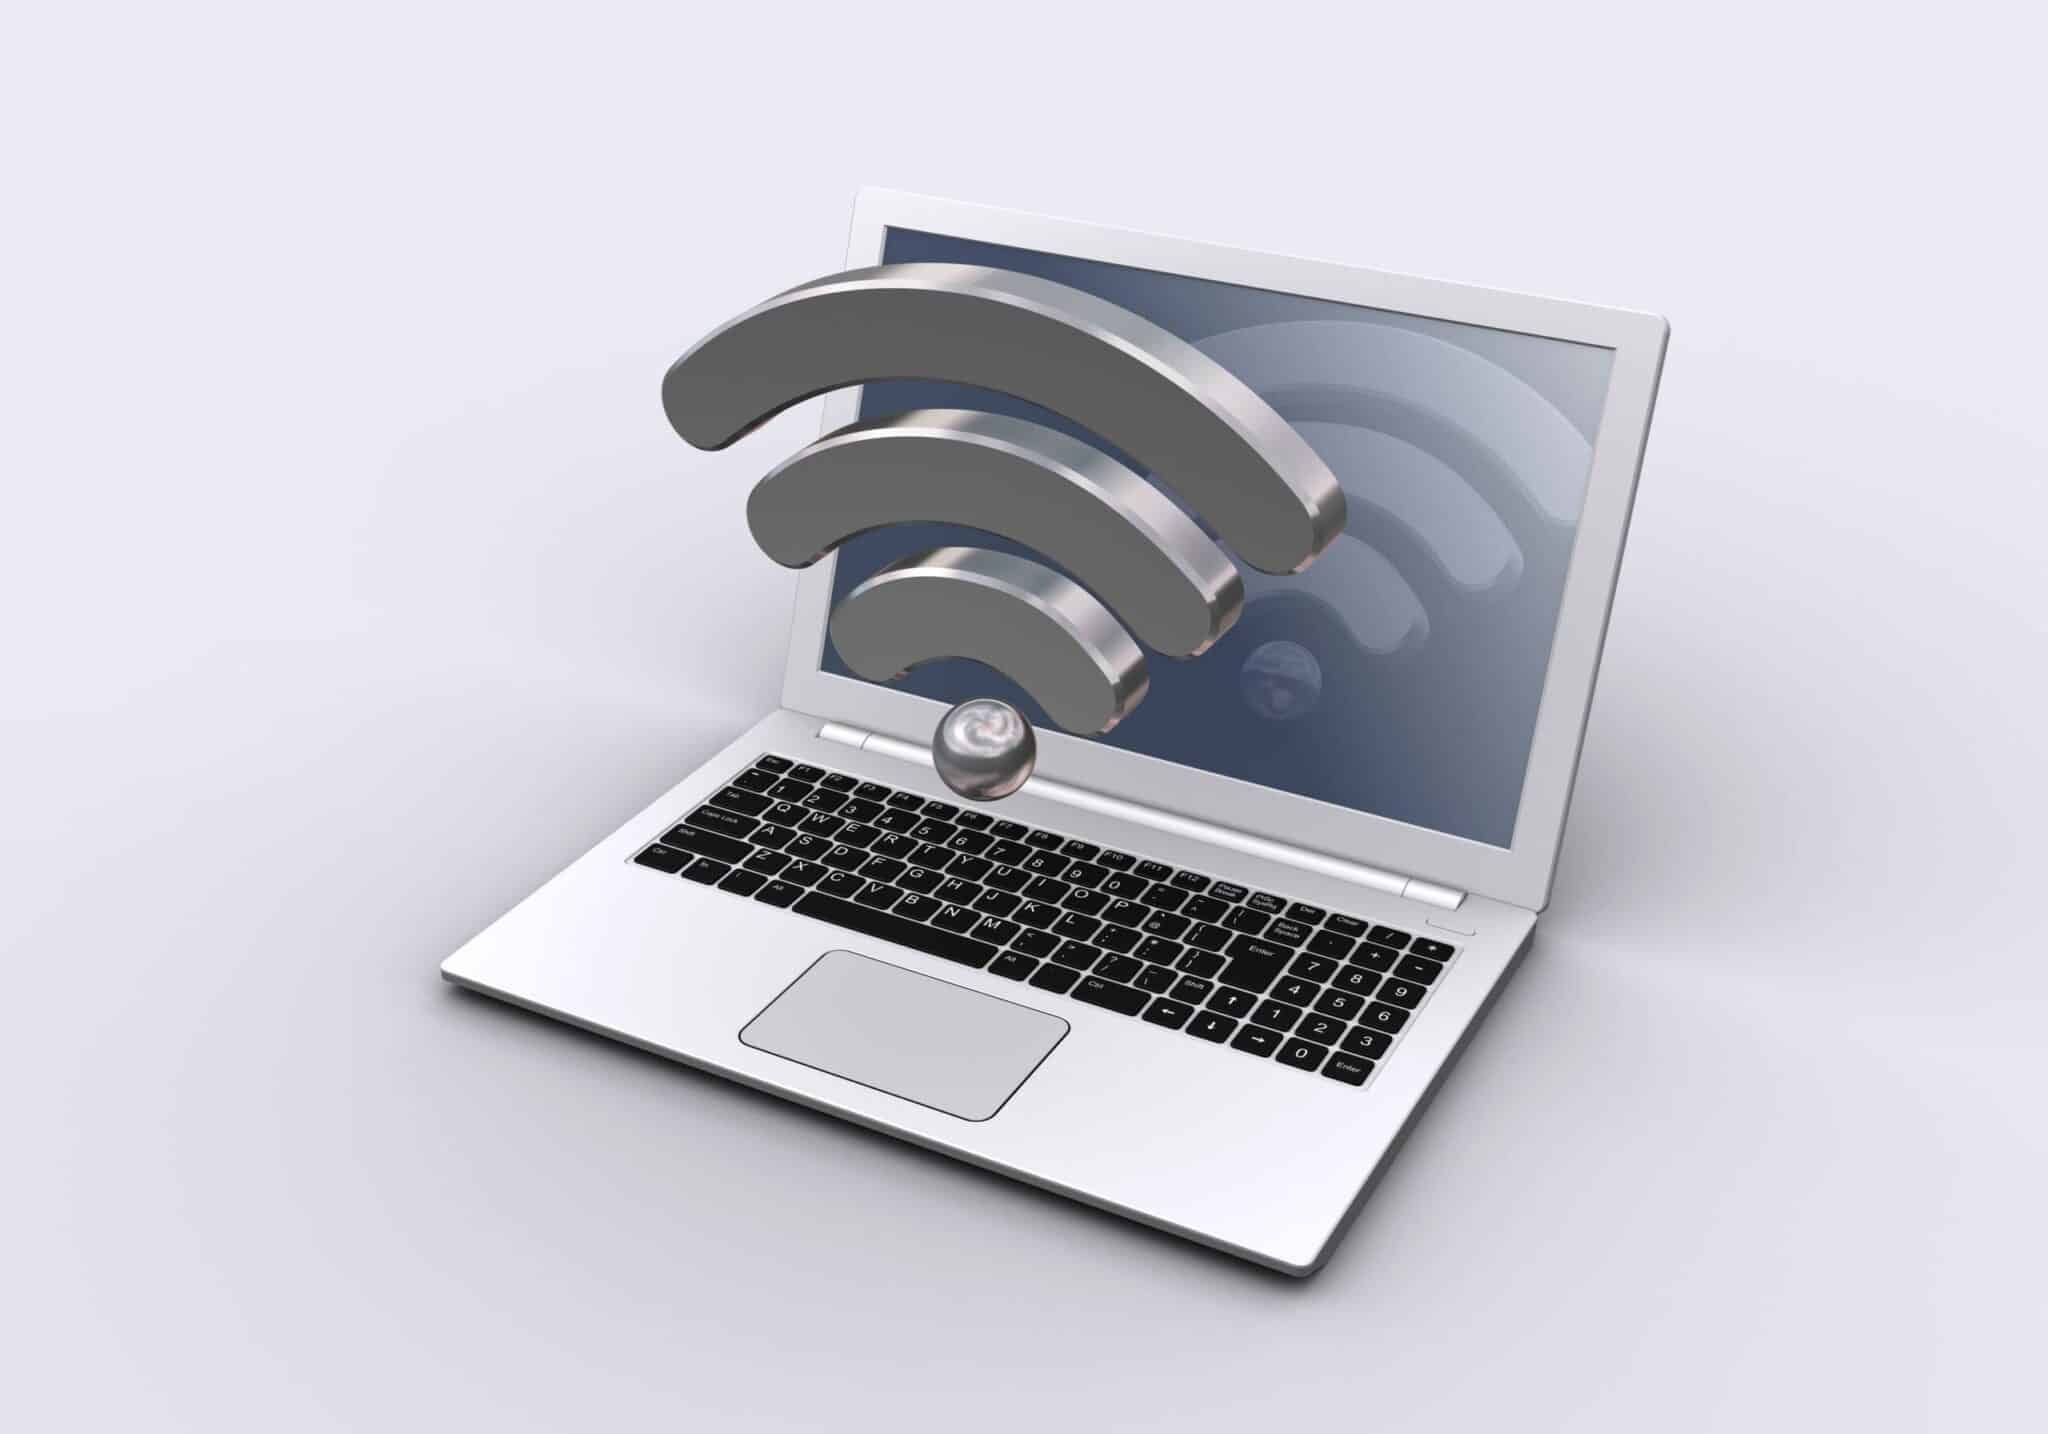 How to Improve Home Wi-Fi: Tips and Advice